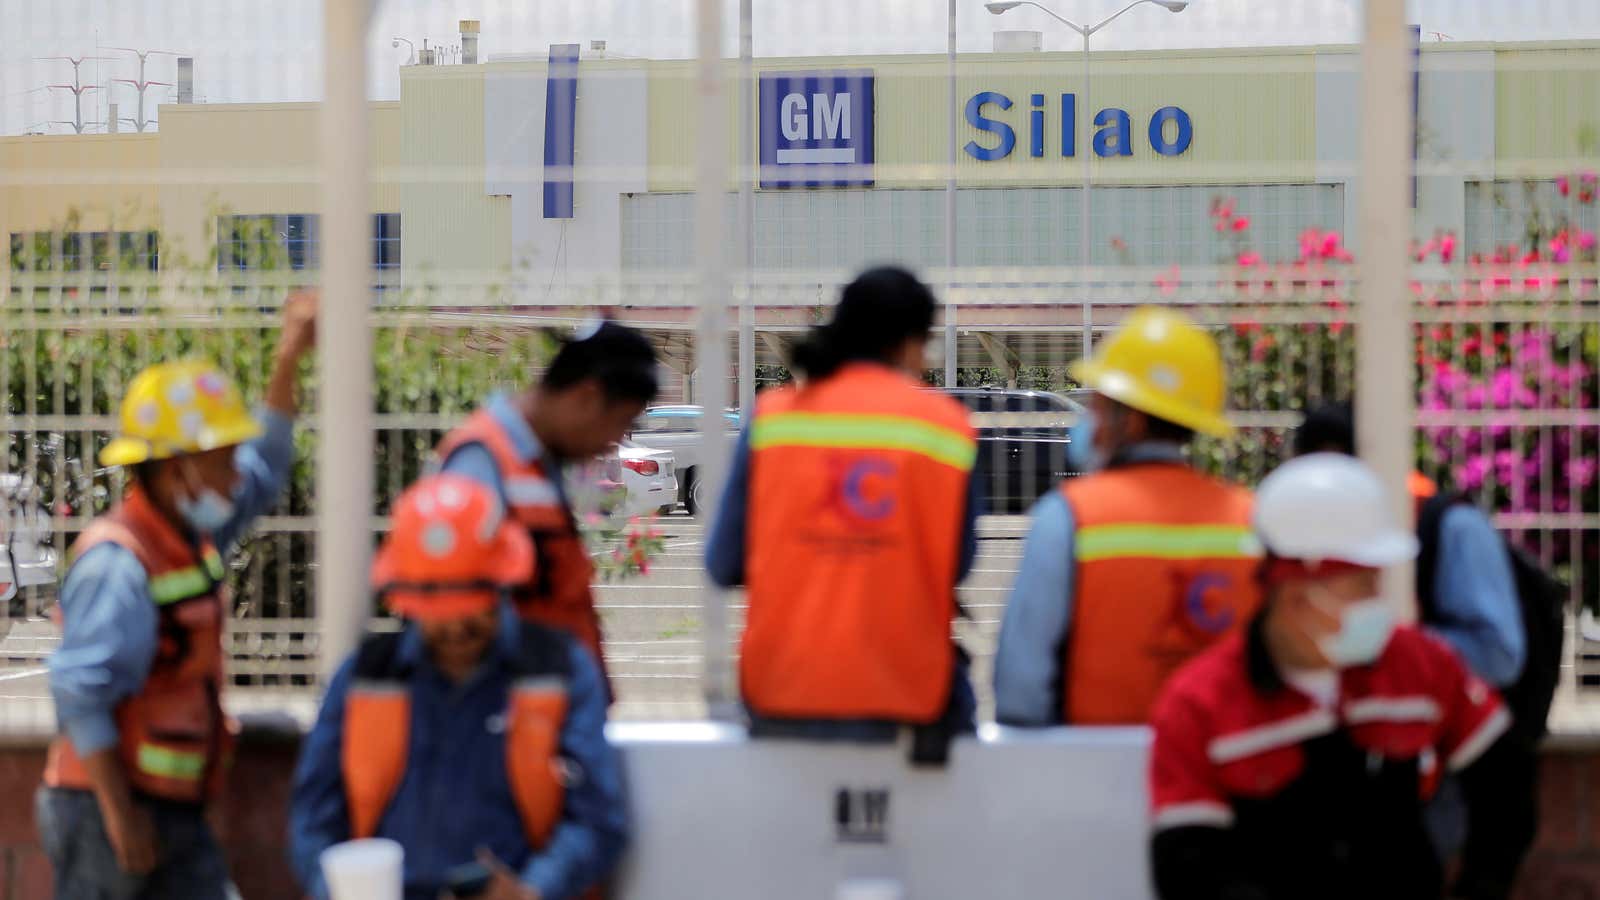 Workers wait outside the General Motors plant in Silao, Mexico.